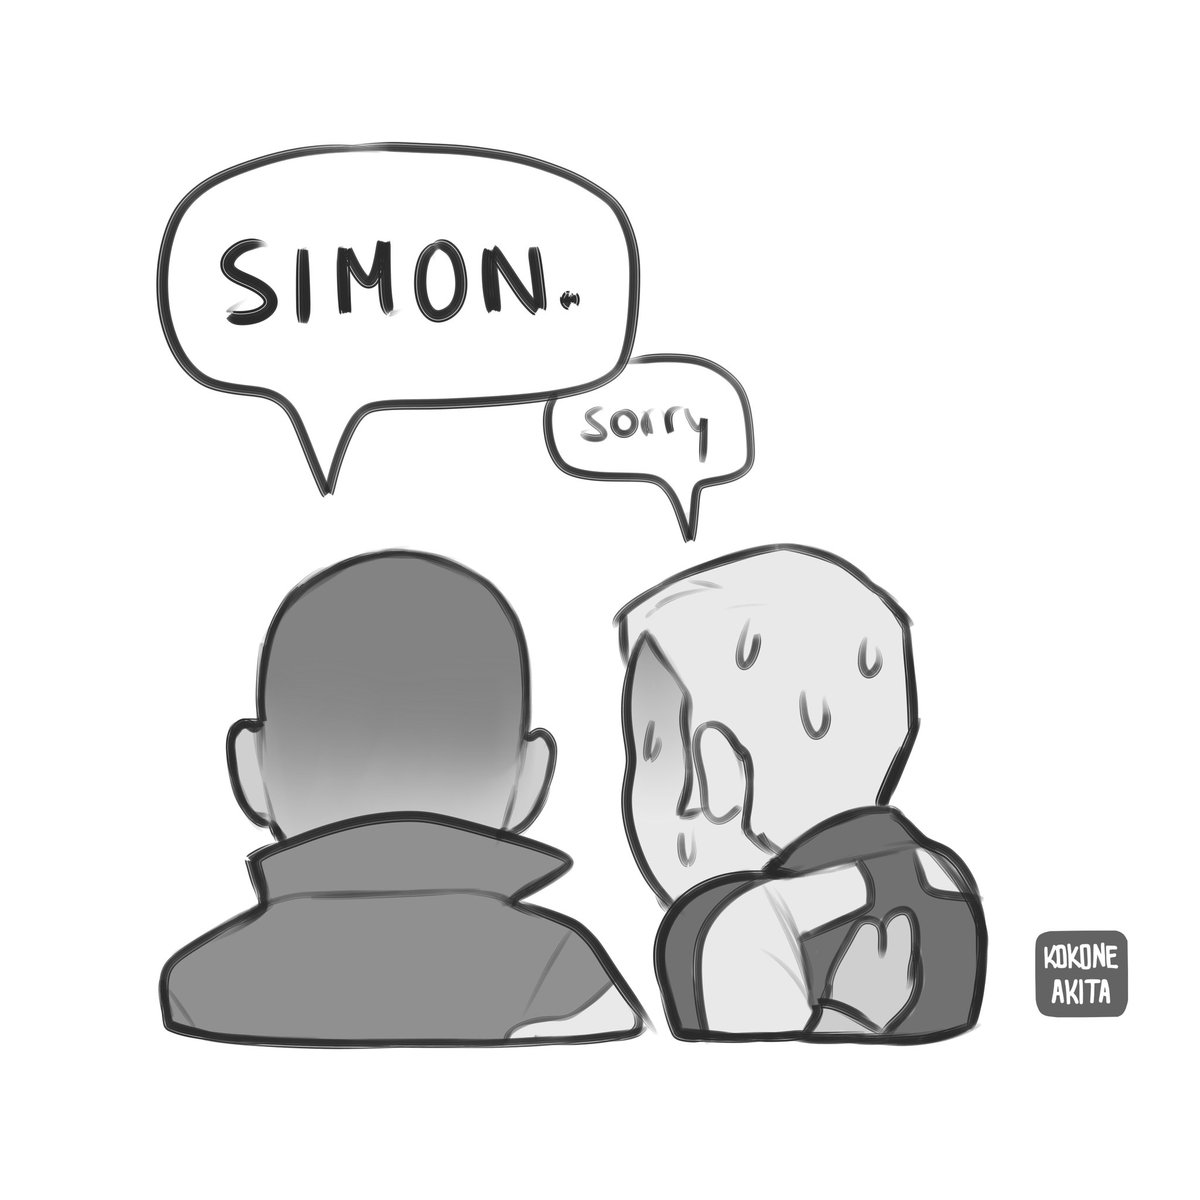 I JUST FOUND THIS IN MY ART FOLDER I-

#DetroitBecomeHuman #simarkus 